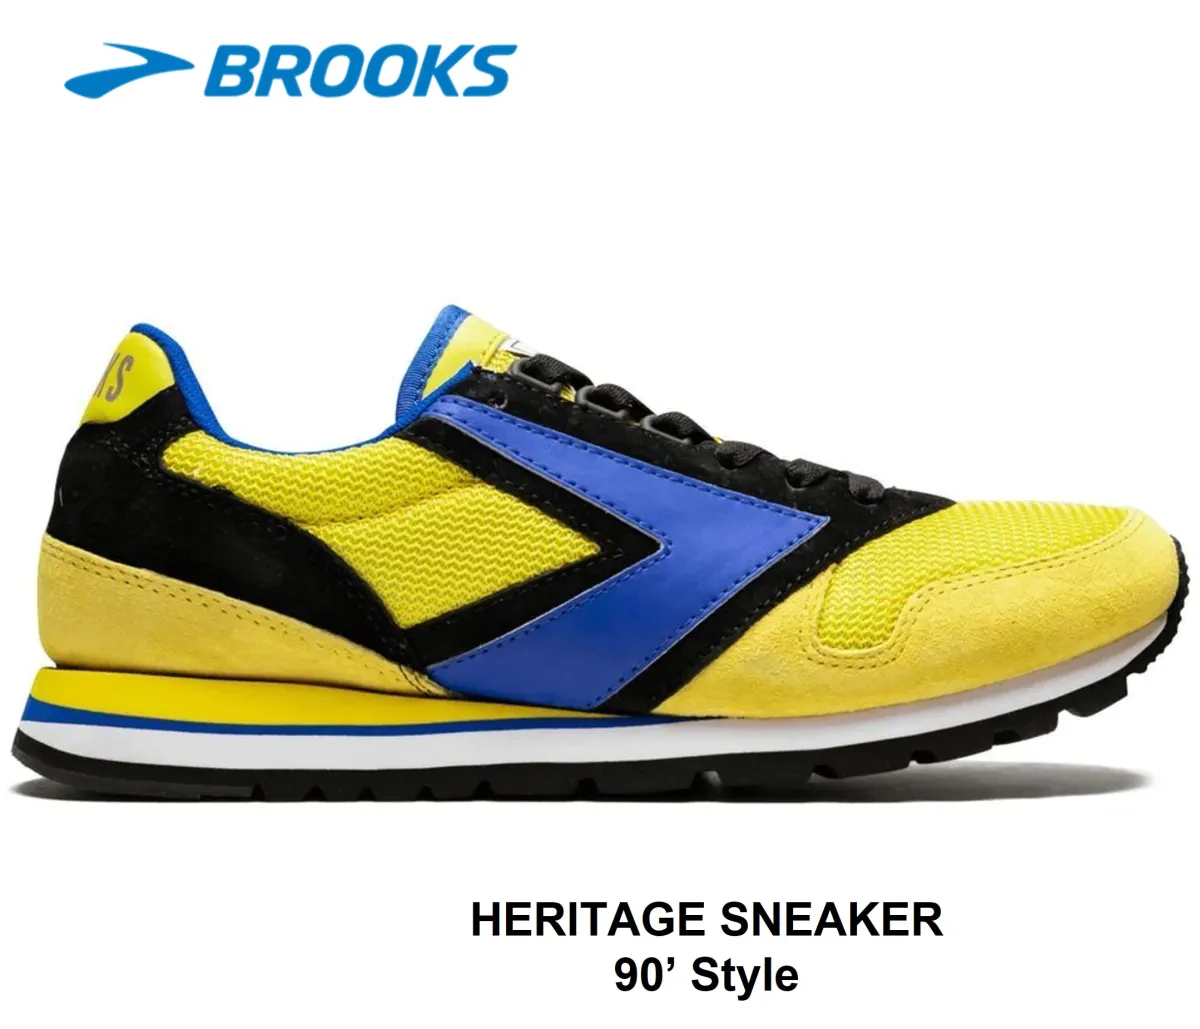 BROOKS Heritage Chariot Yellow PREMIUM Sneaker (Pig Skin) (Off Season /  DEFECT) (No shoe box provided) For Lifestyle / Walking / Low Top Sneaker  (Limited Edition) | Lazada